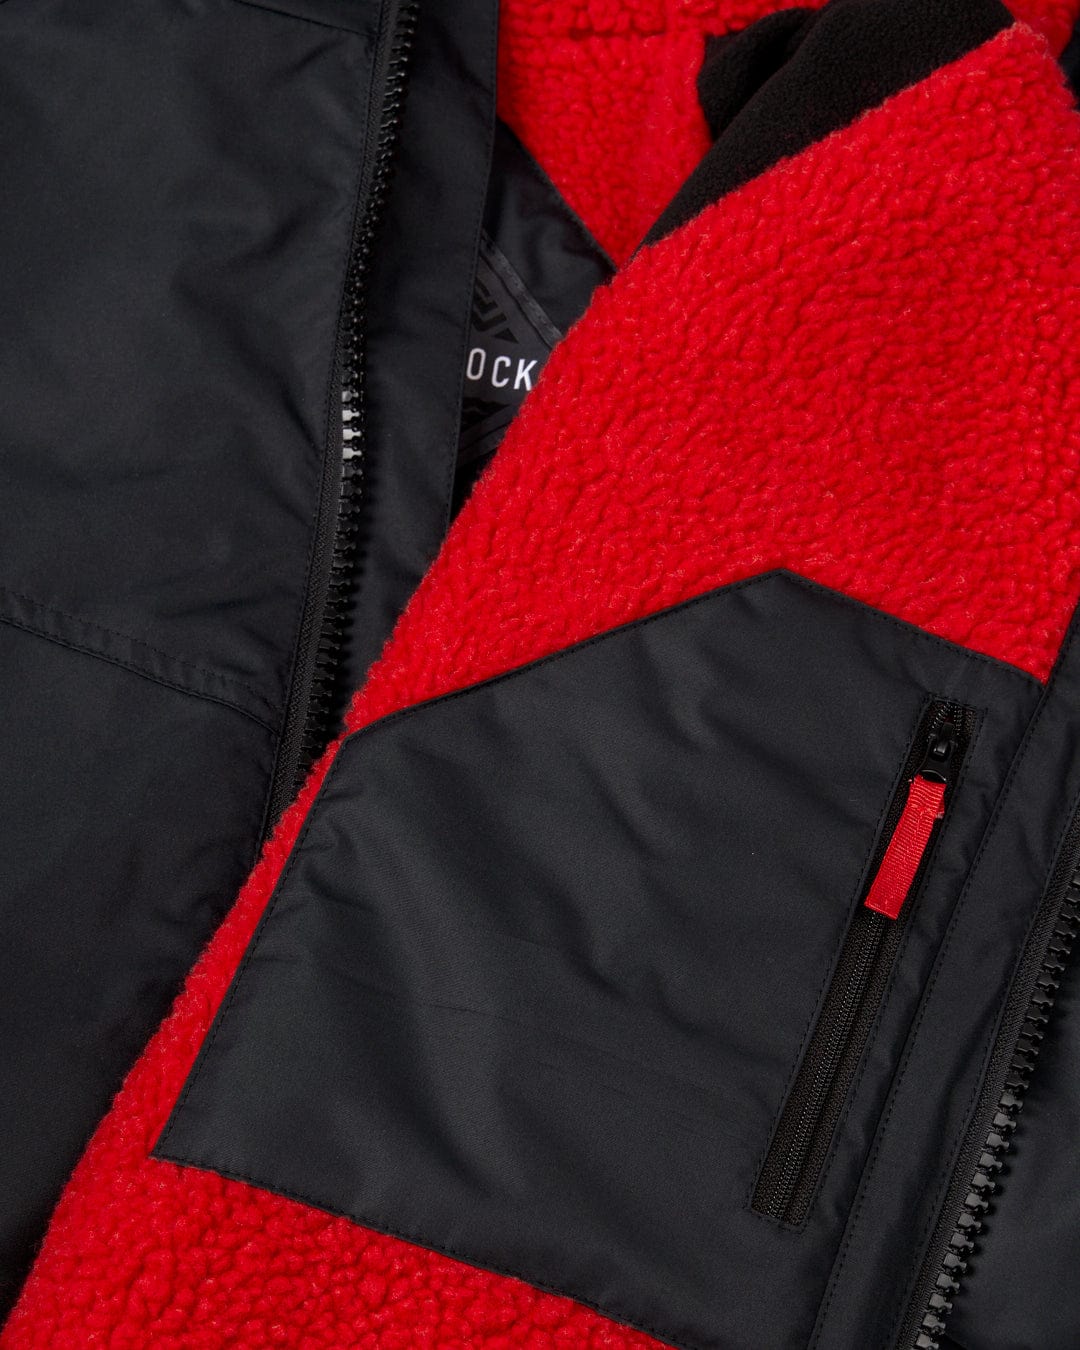 Close-up of a Saltrock Recycled Kids Four Seasons Changing Robe - Black/Red, with a fleece texture and visible zipper details.